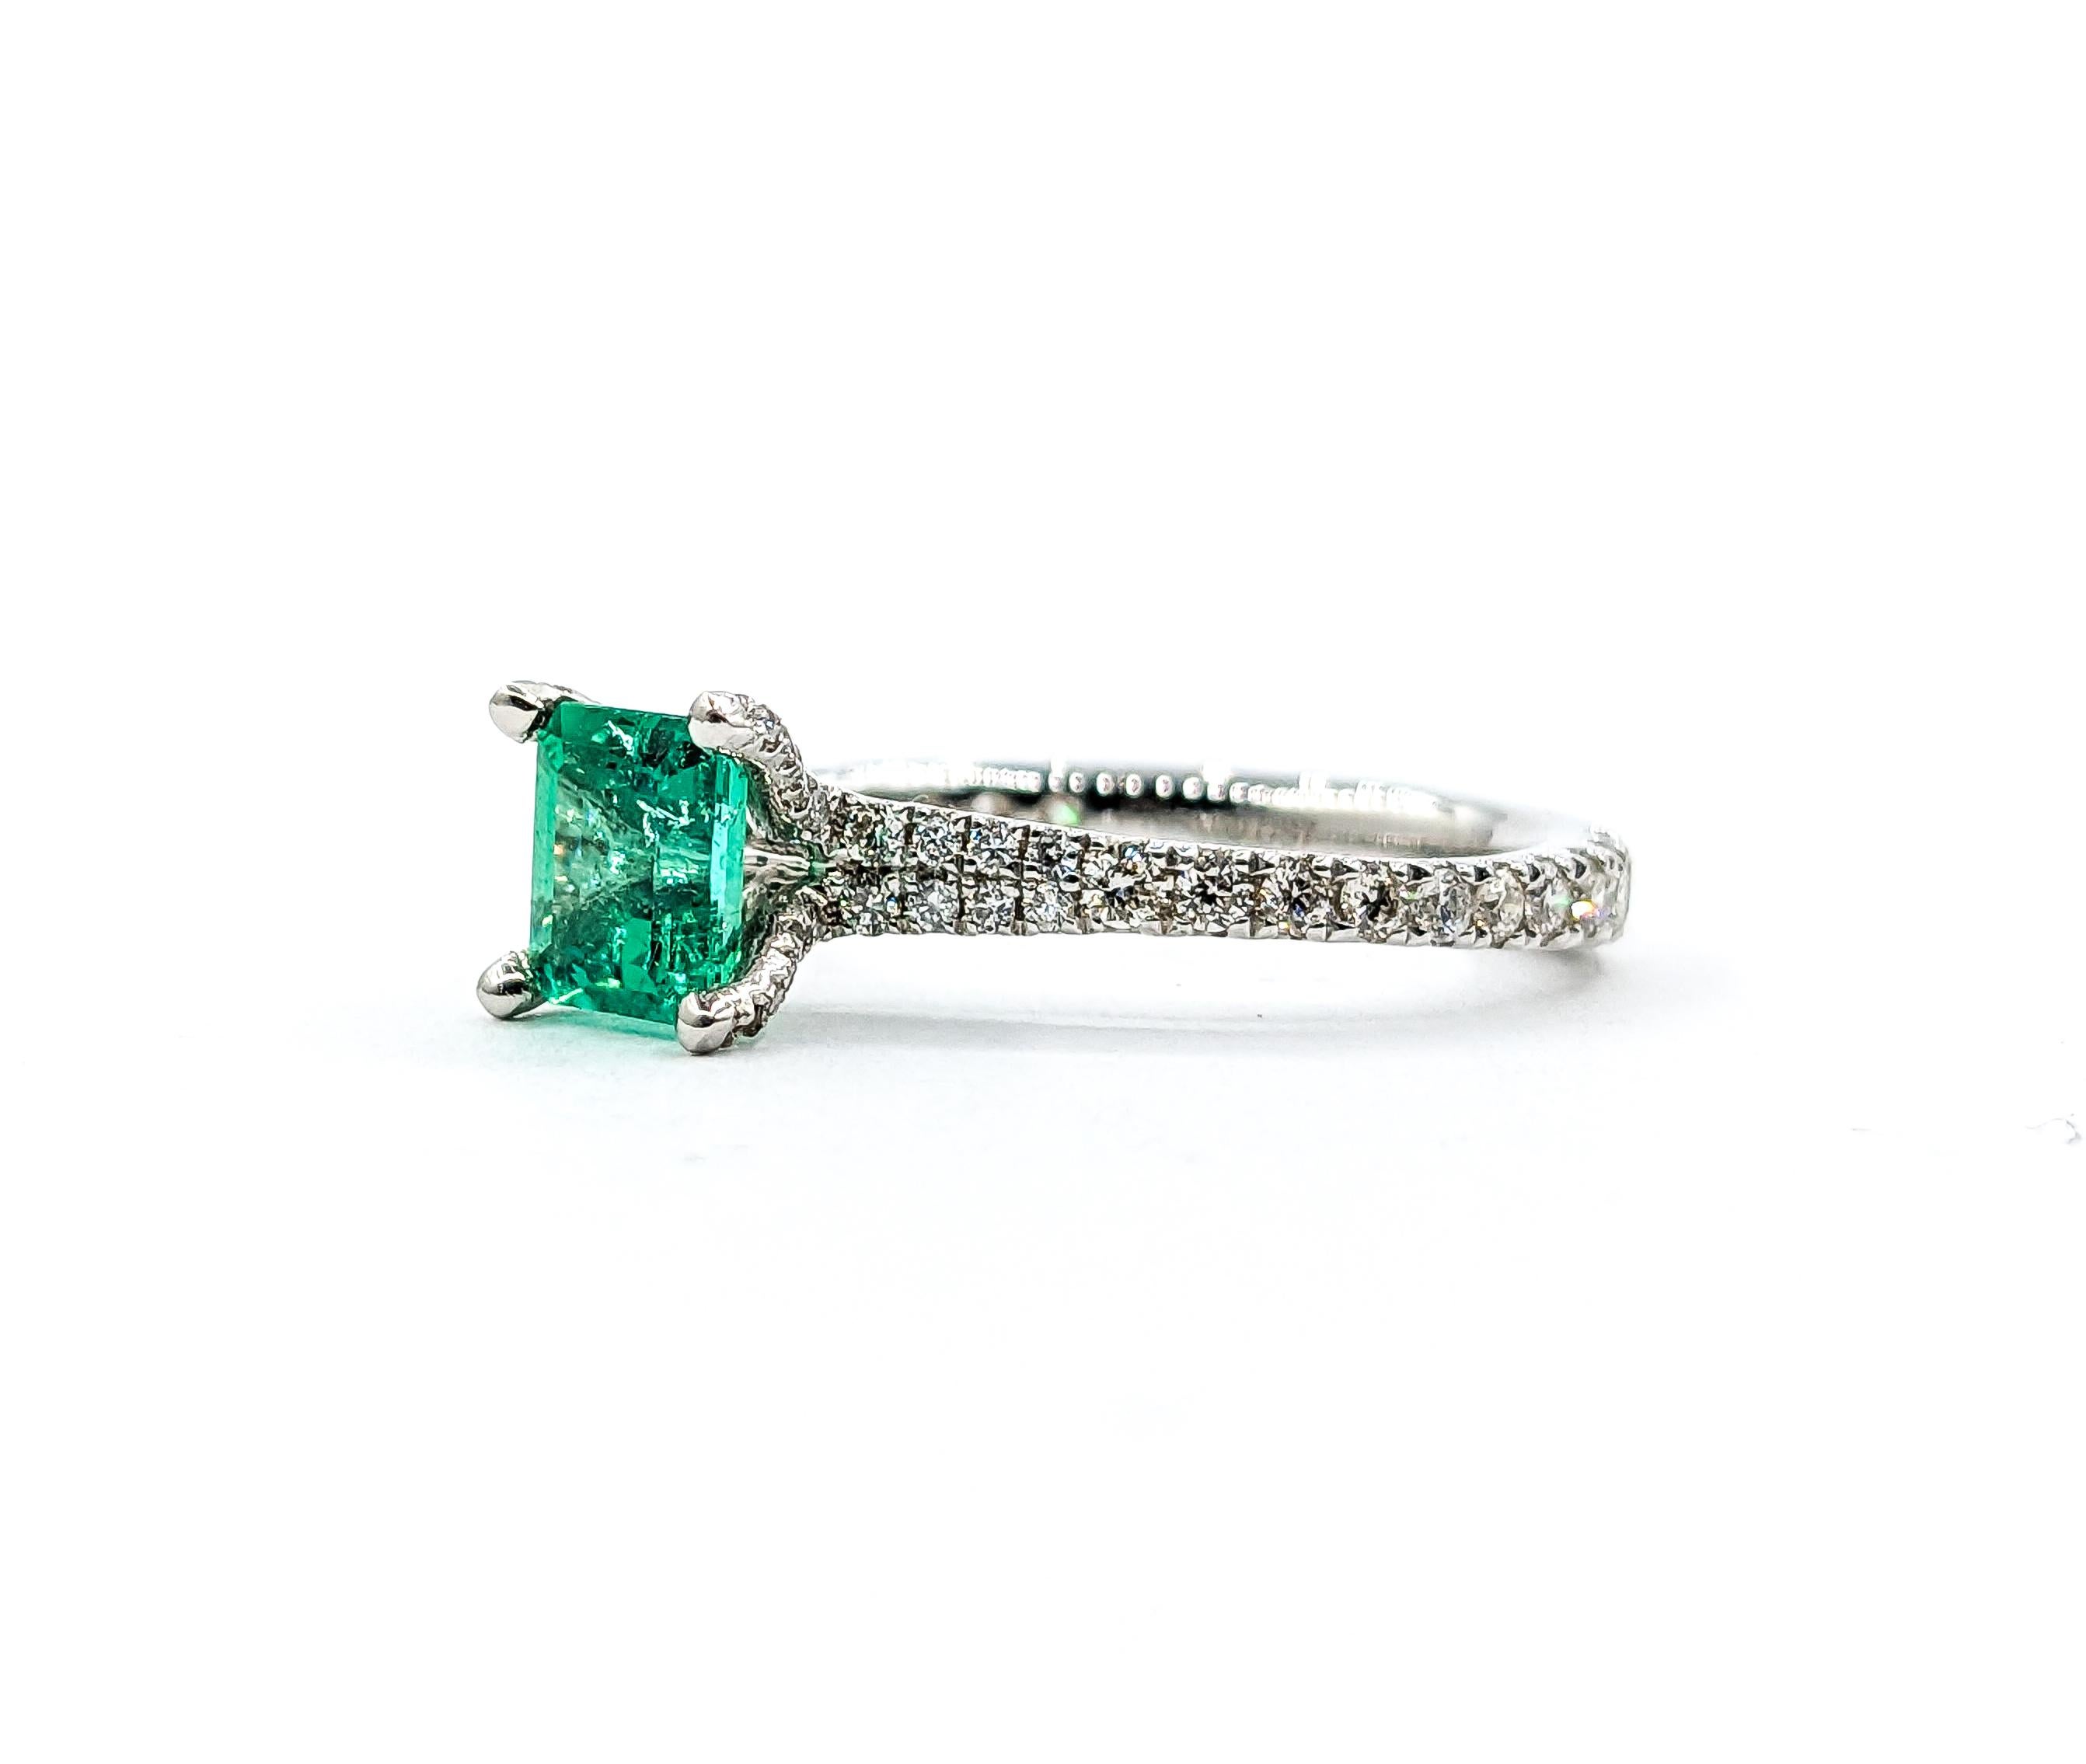 Vibrant Platinum Colombian Emerald & Diamond Ring

Indulge in the captivating elegance of this 950 platinum ring, boasting a mesmerizing .82 carat natural Colombian emerald. Further enhancing the gorgeous centerstone are .46 carats of sparkling